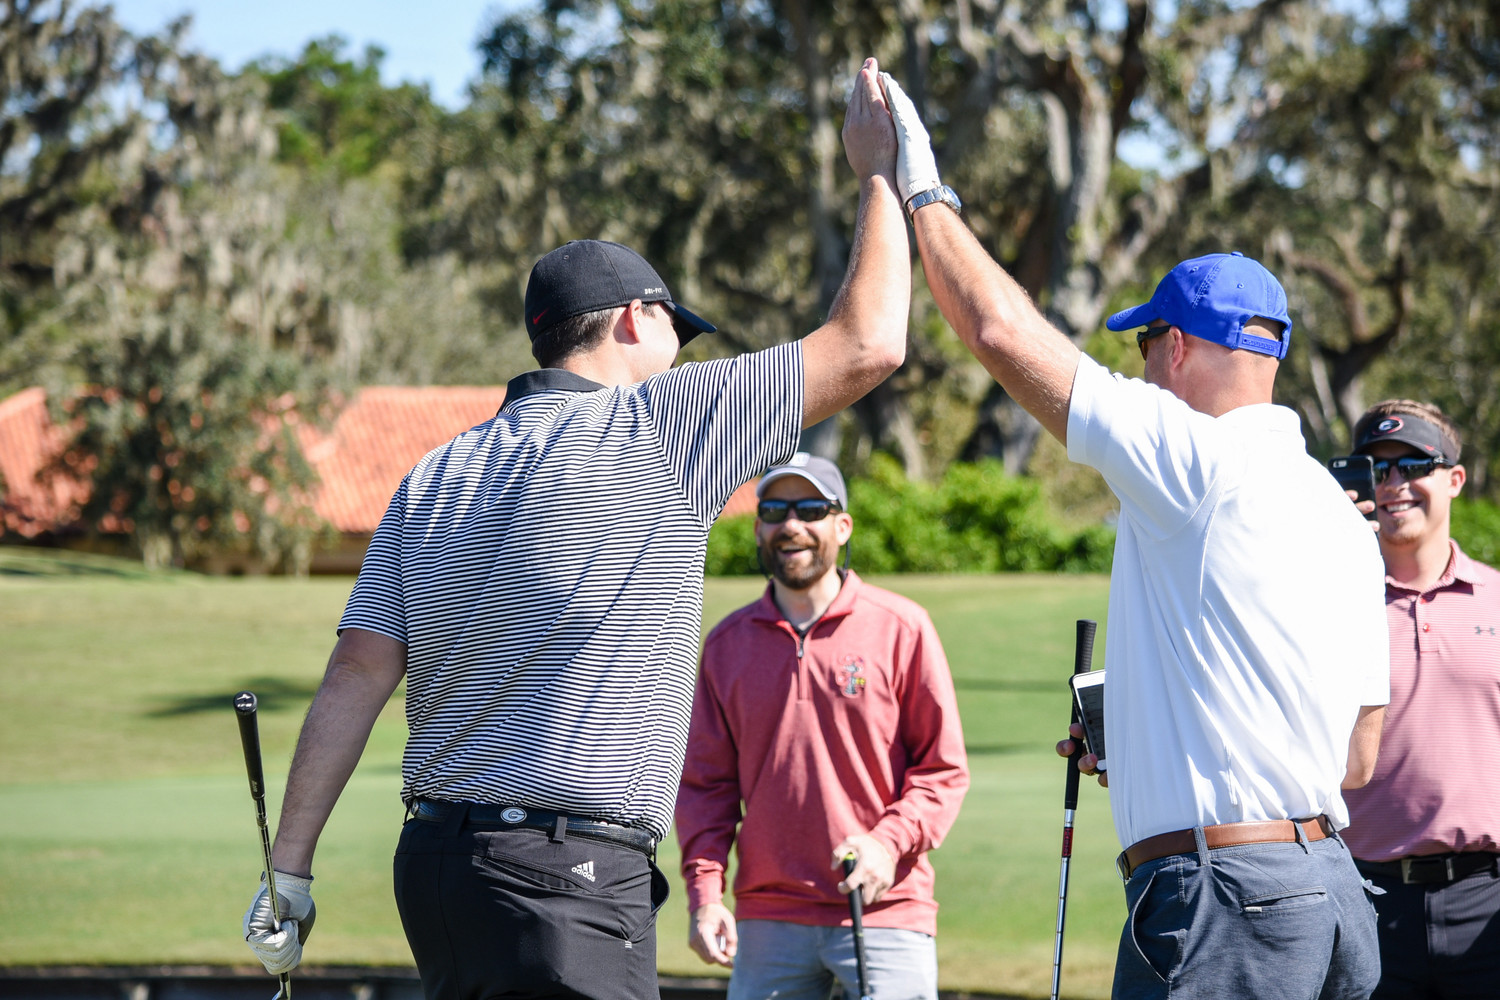 Danny Wuerffel (right) celebrates his team’s success during the Desire Cup.